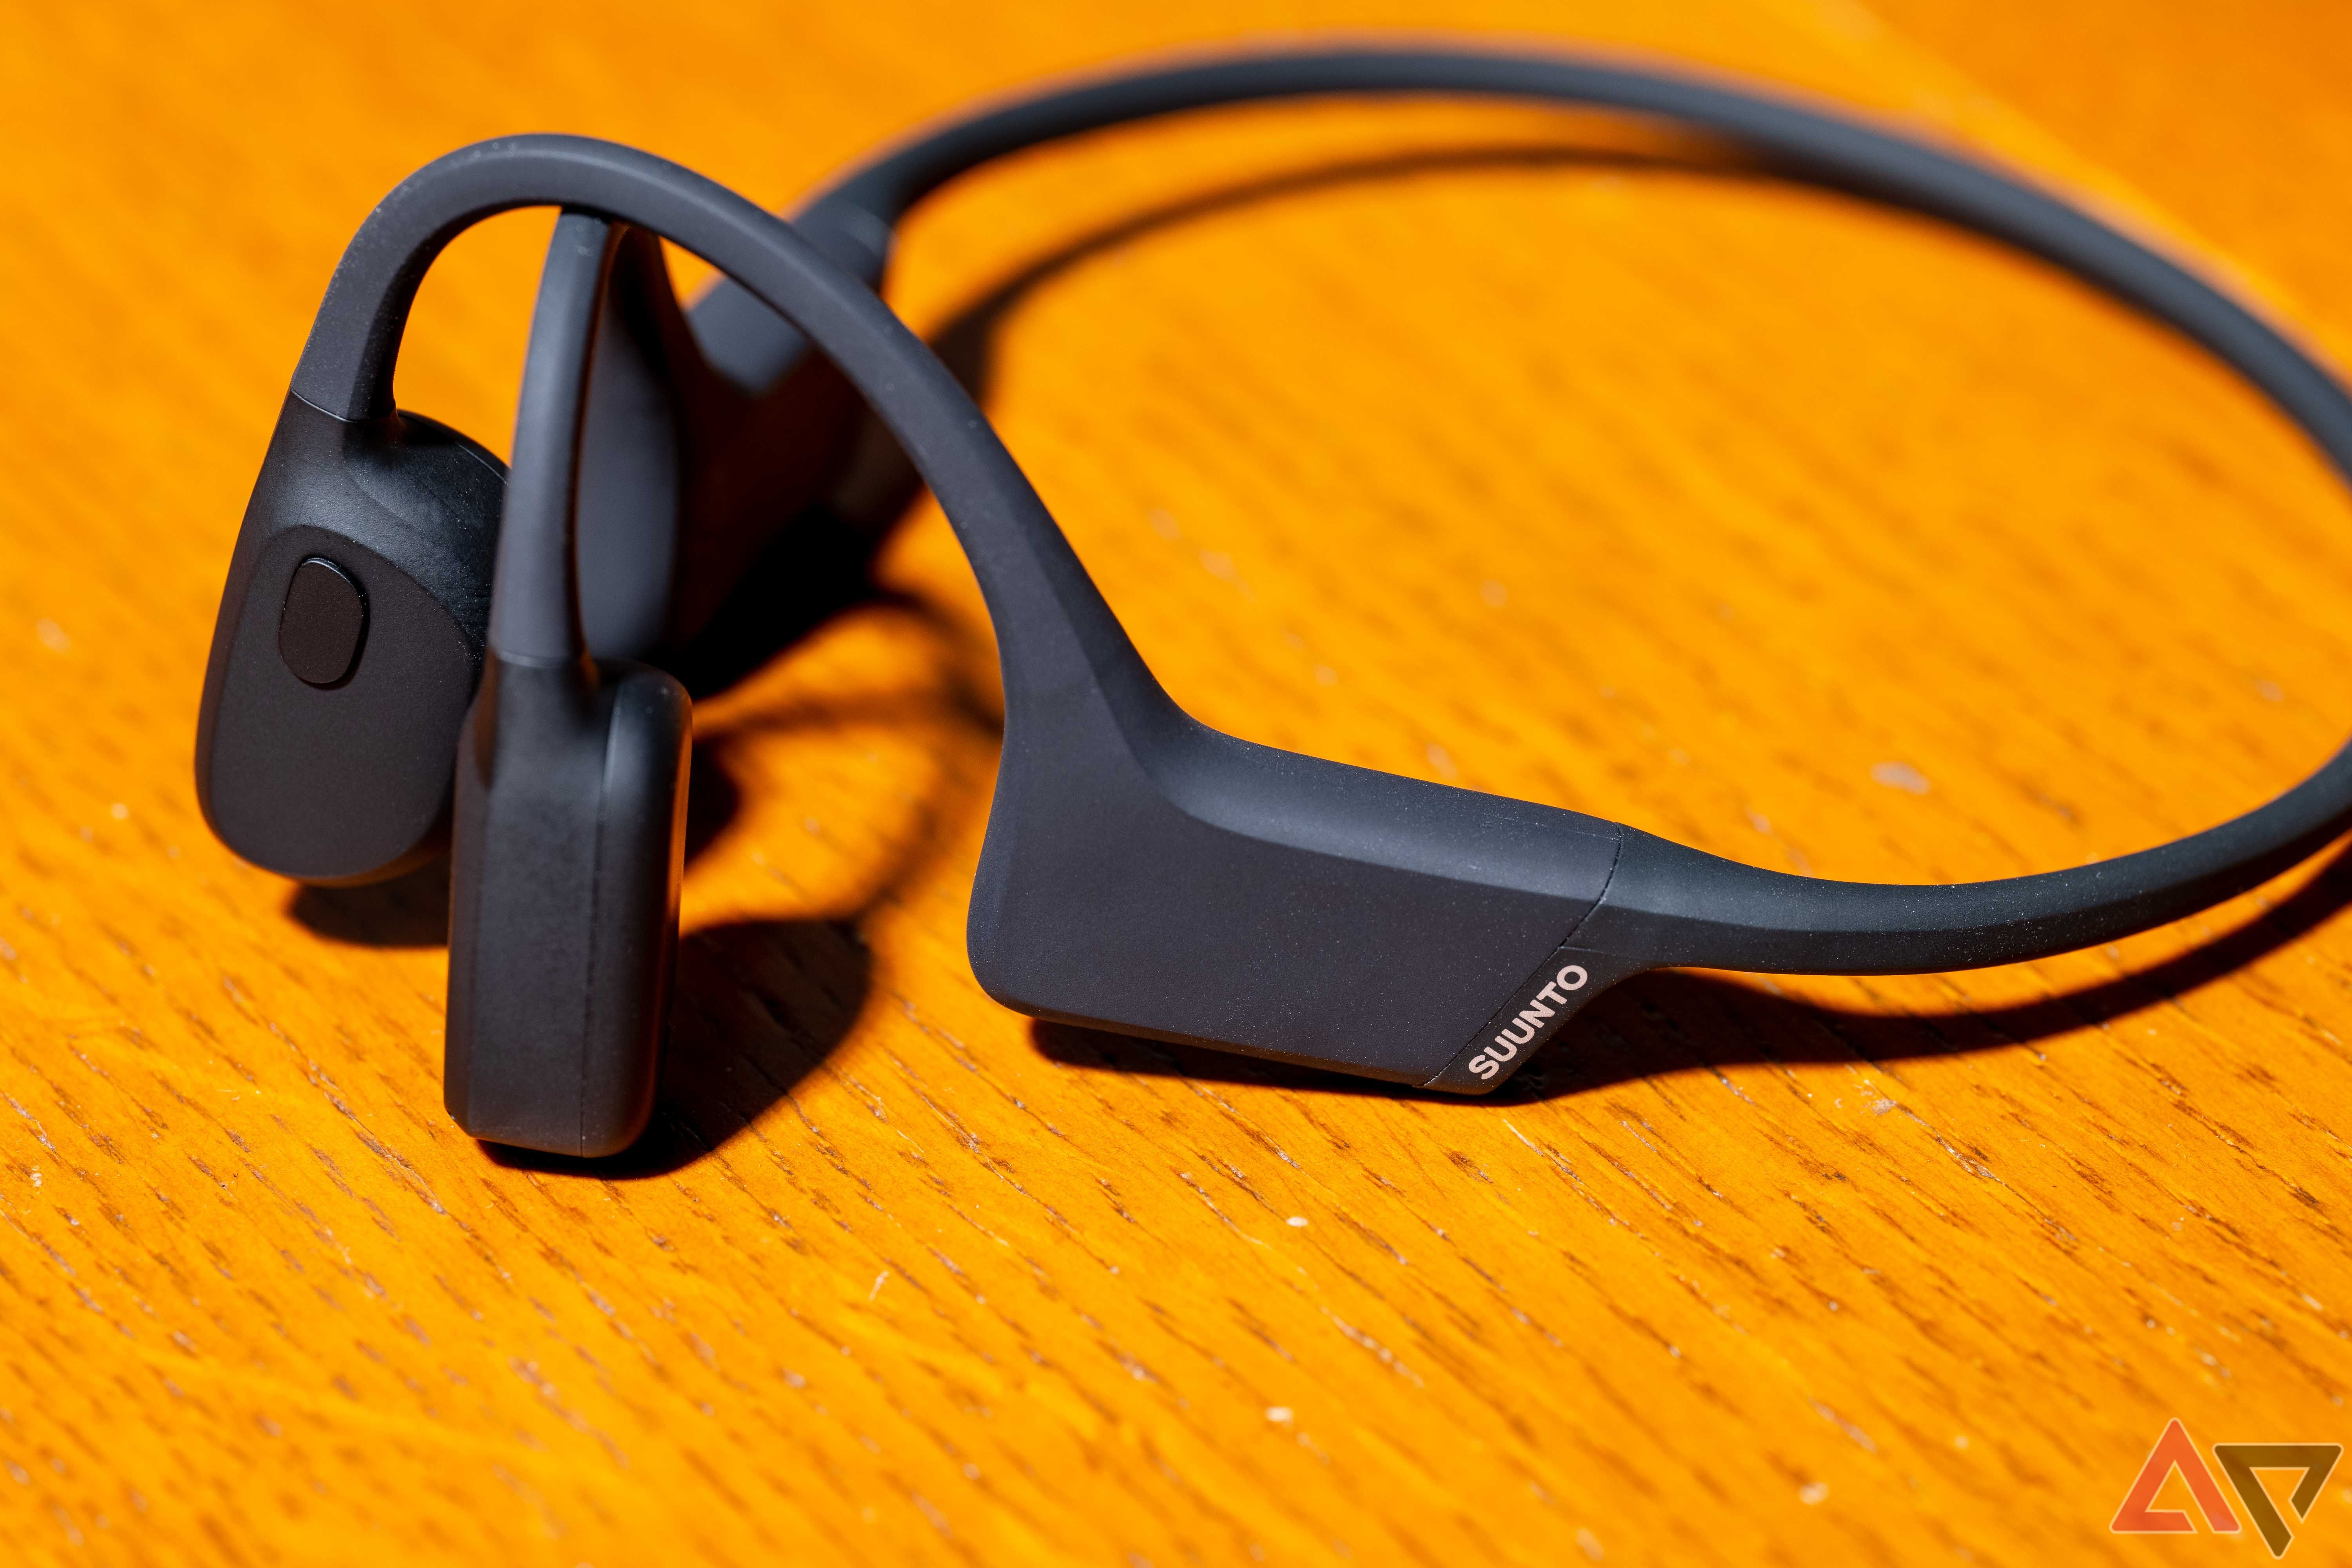 The Suunto Sonic bone conduction headset sitting on a table, seen from the lefthand side.